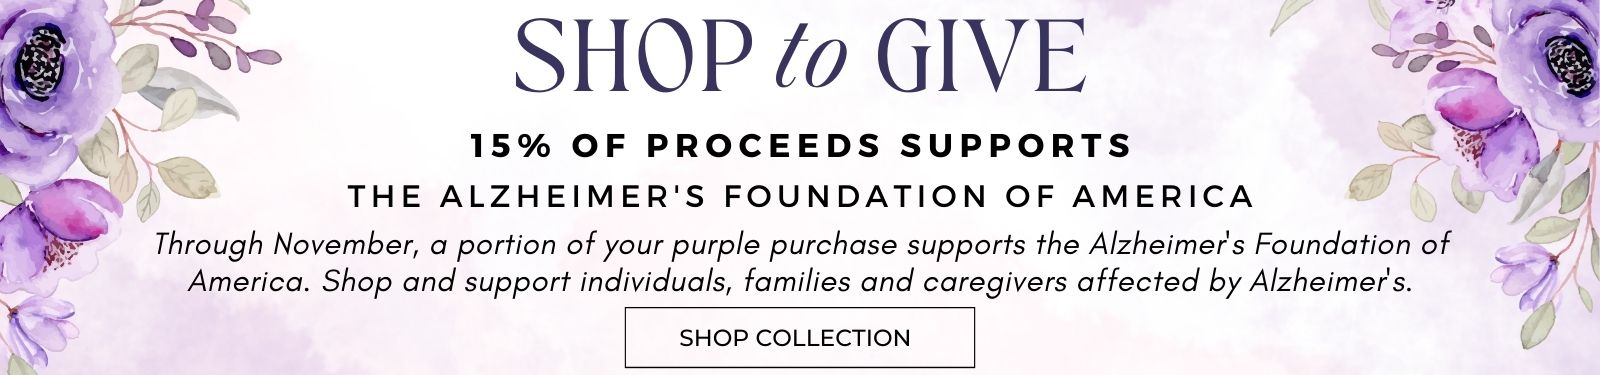 Shop to Give-November. 15% of purple purchase supports the Alzheimer's Foundation of America. Shop and support individuals, families and caregivers affected by Alzheimer's.